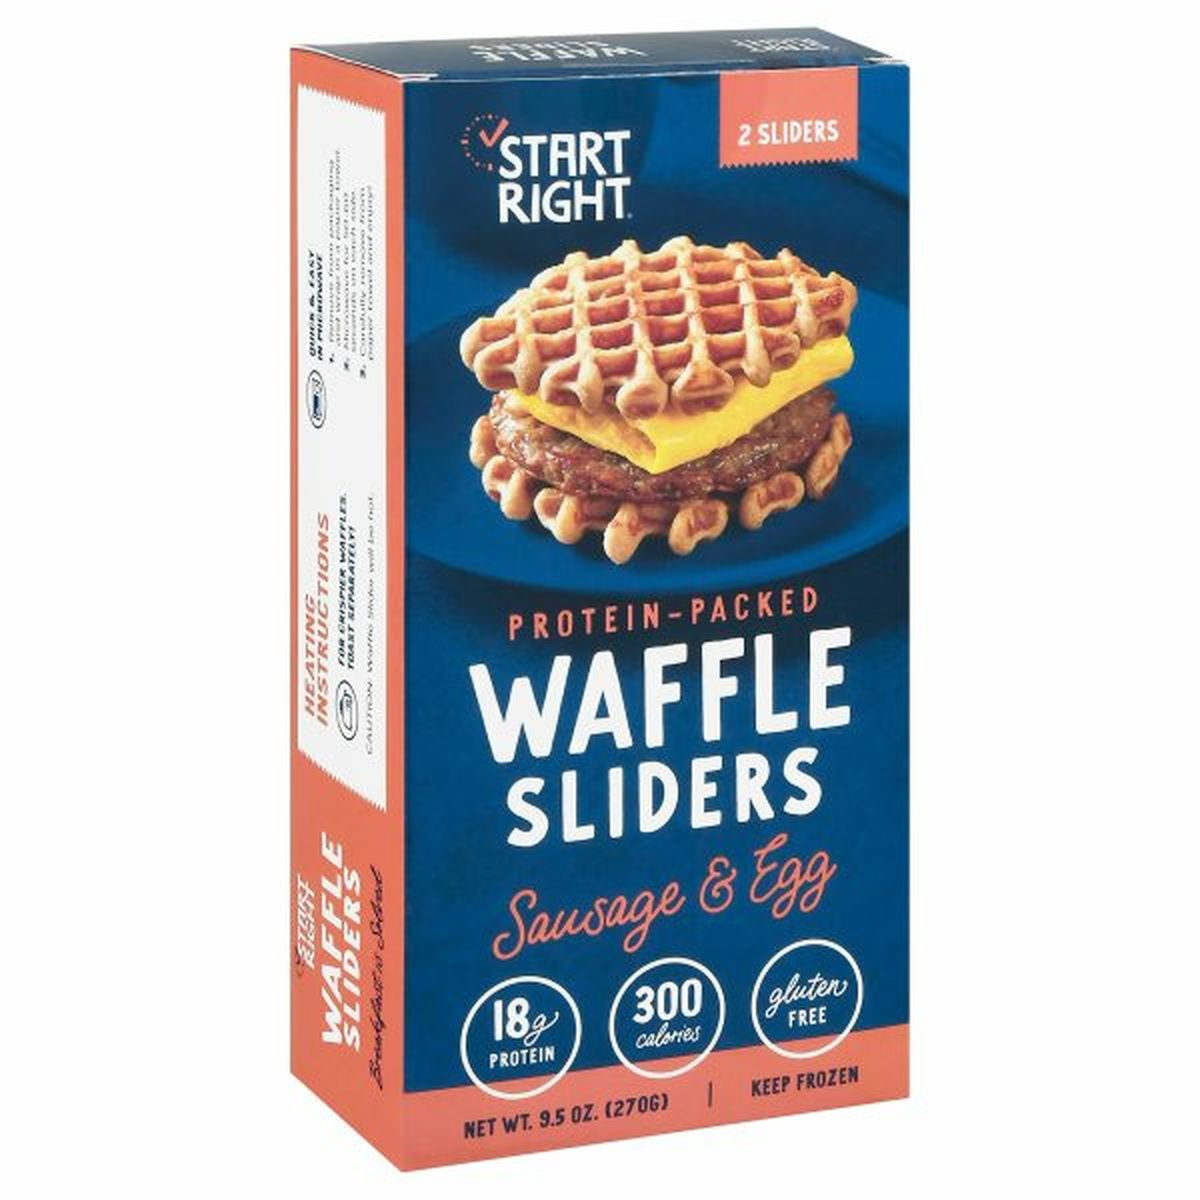 Calories in Start Right Waffle Sliders, Sausage & Egg